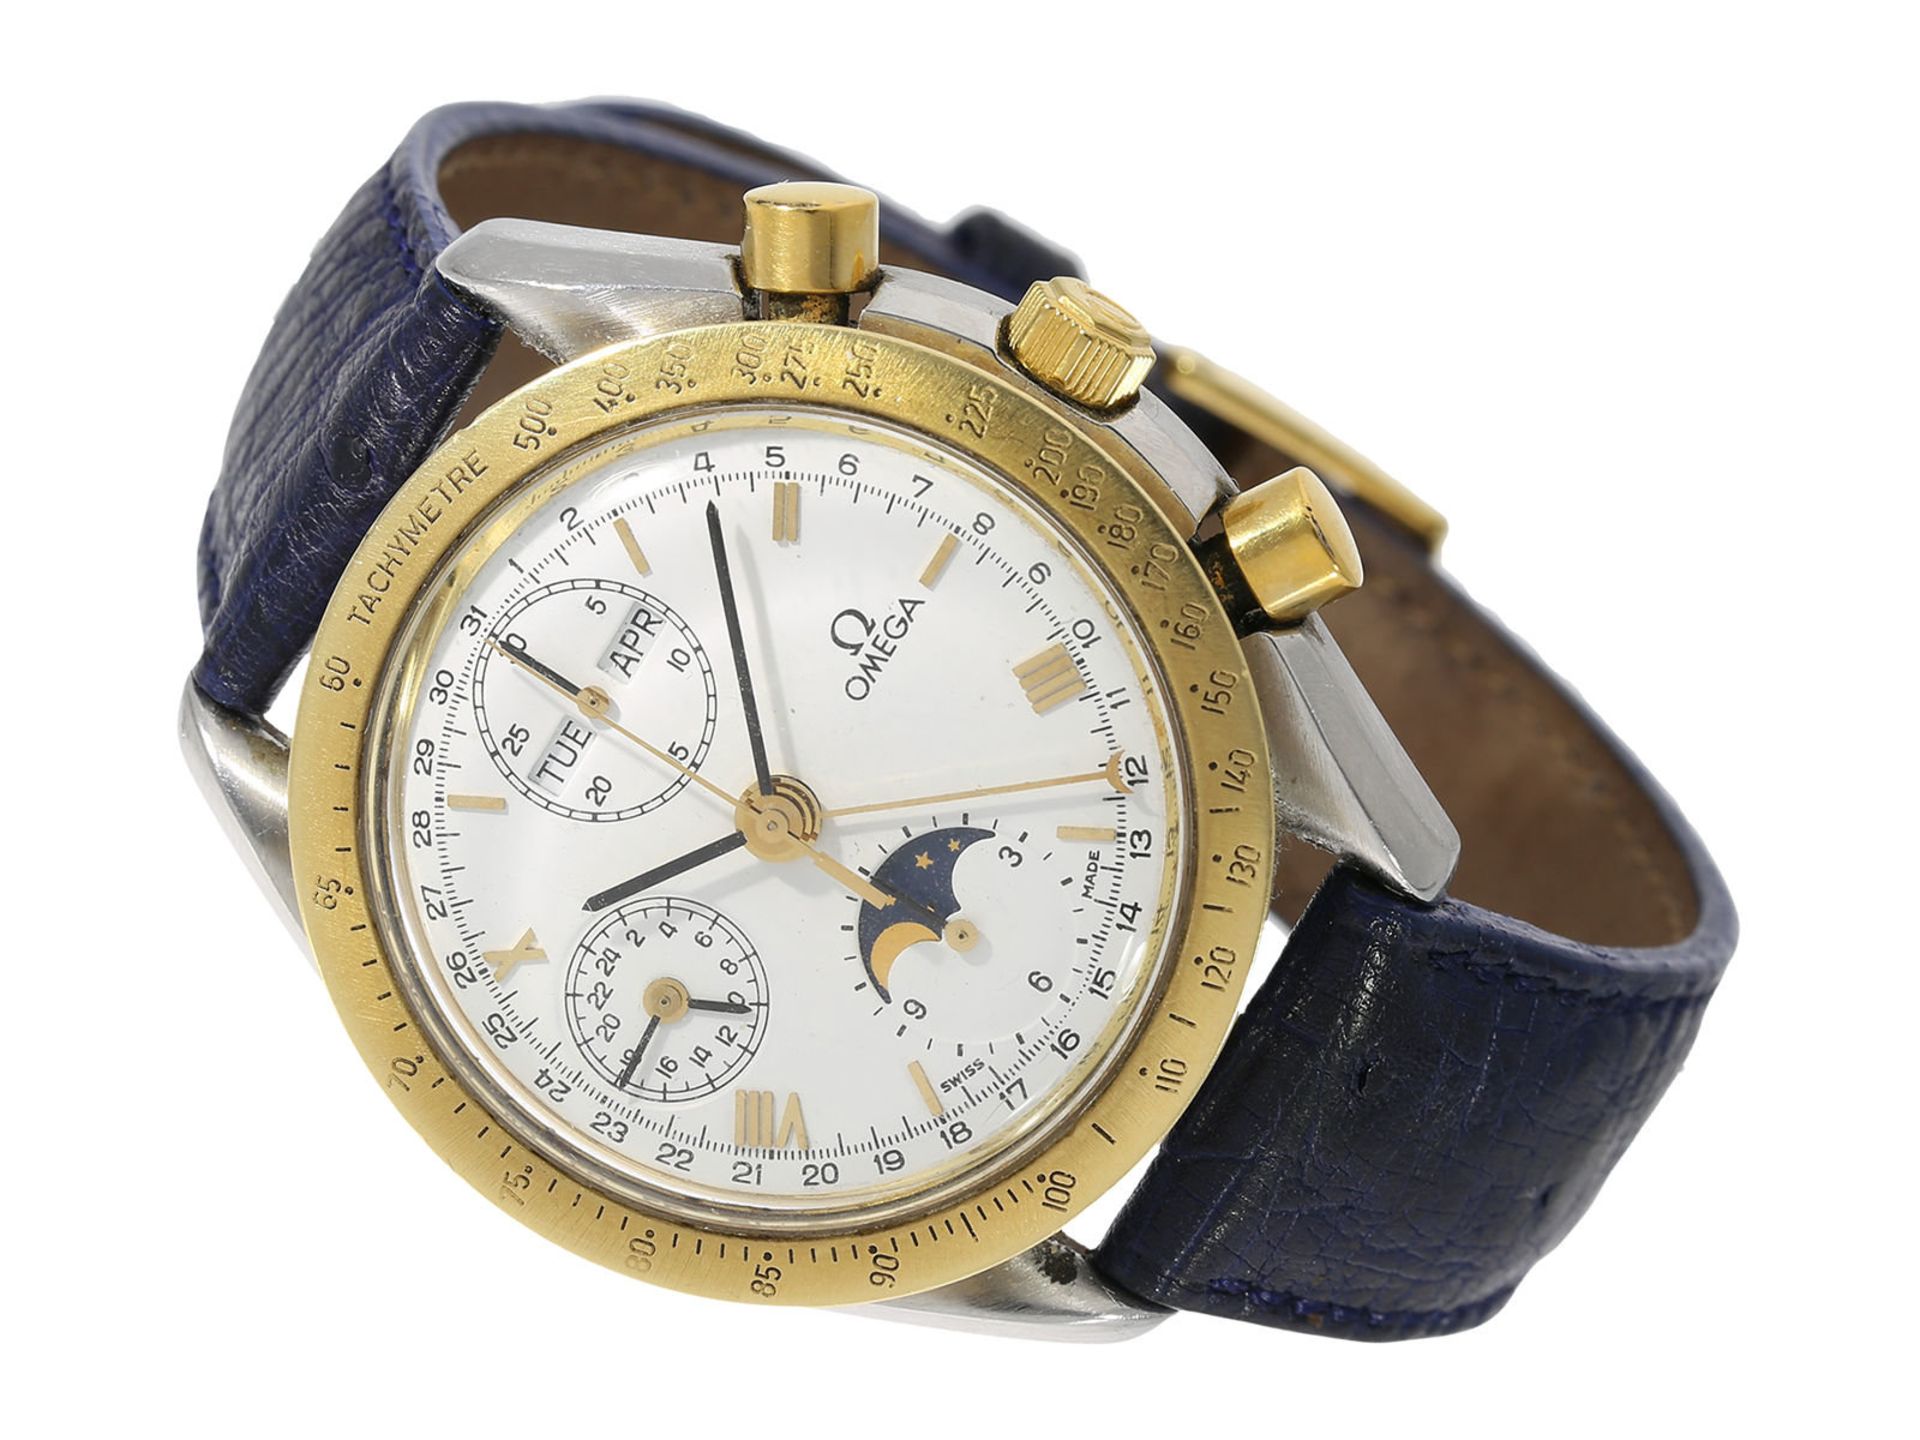 Wristwatch: rare vintage Omega chronograph with triple calendar and moon phase, Omega Speedmaster